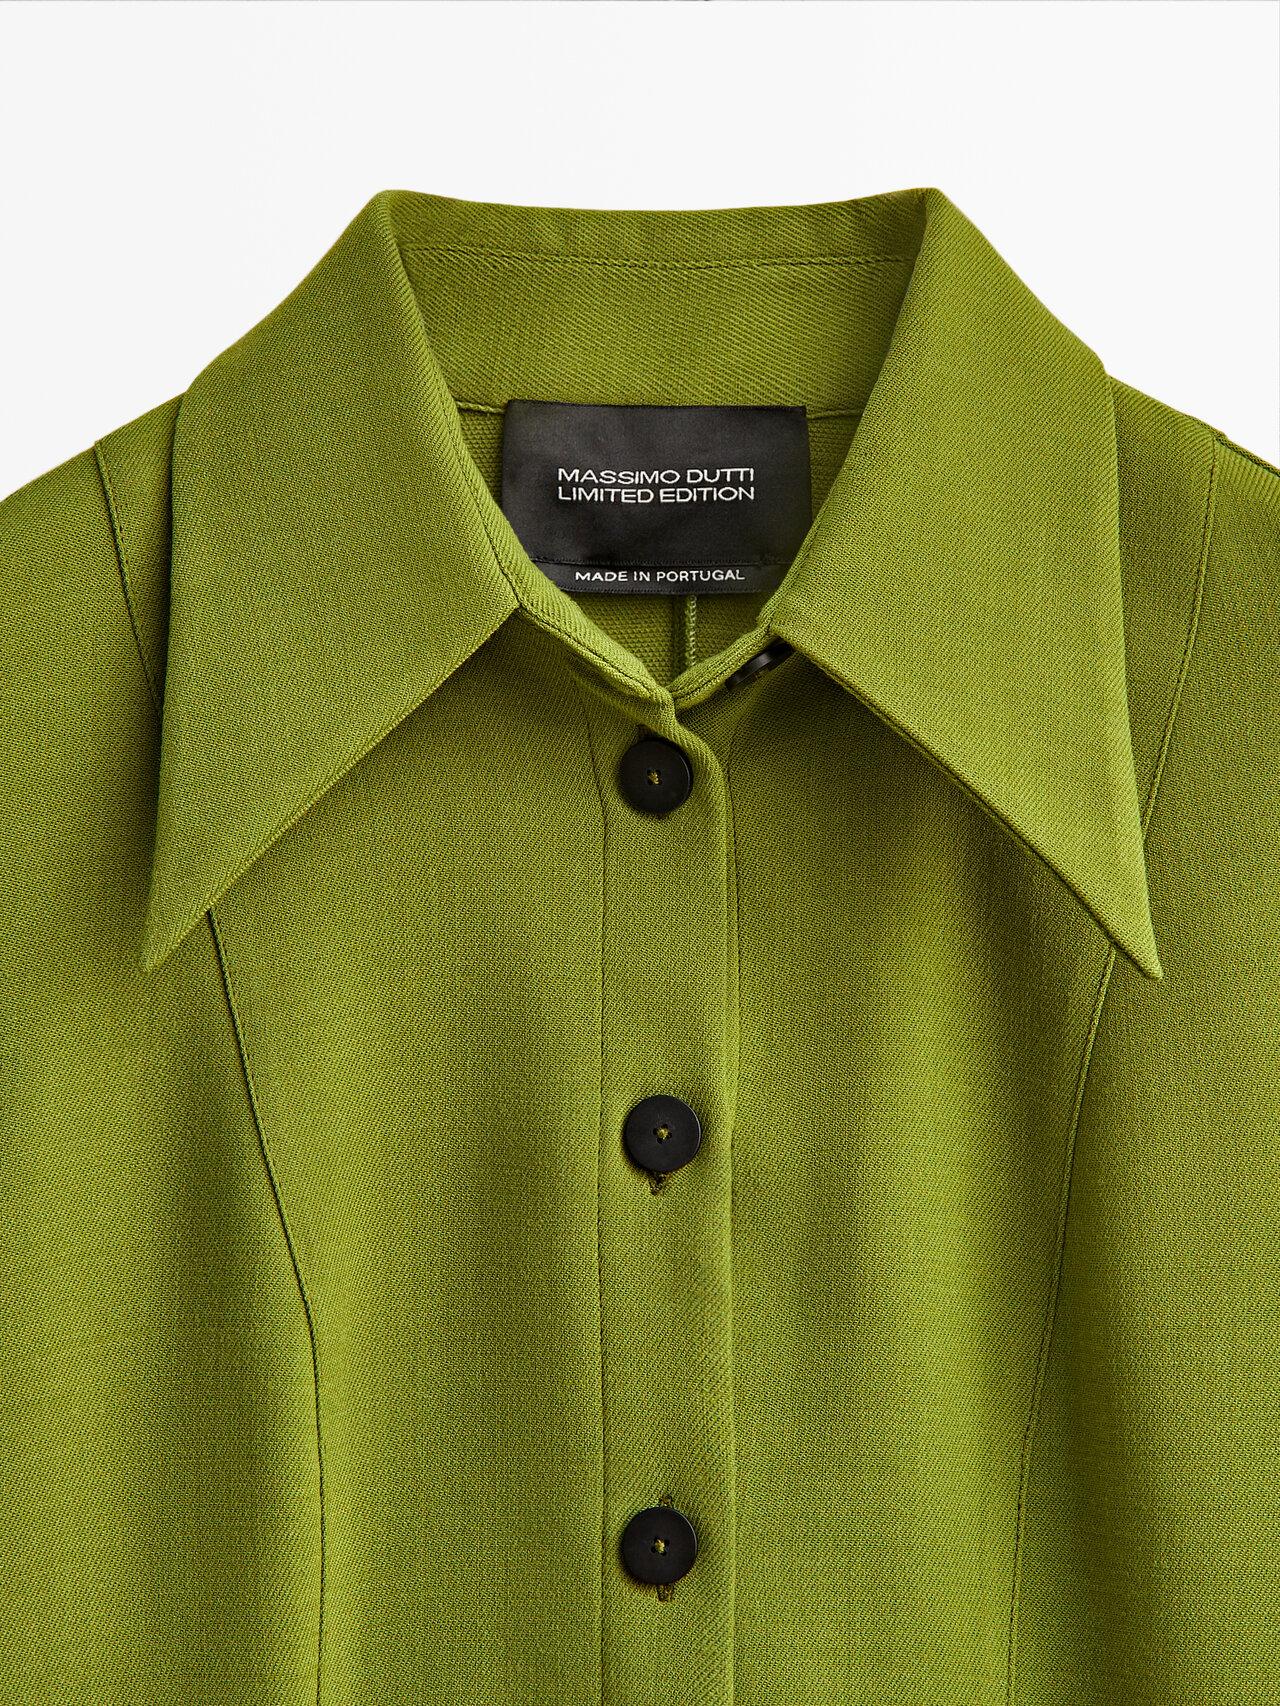 MASSIMO DUTTI Green Shirt With Slits - Limited Edition | Lyst